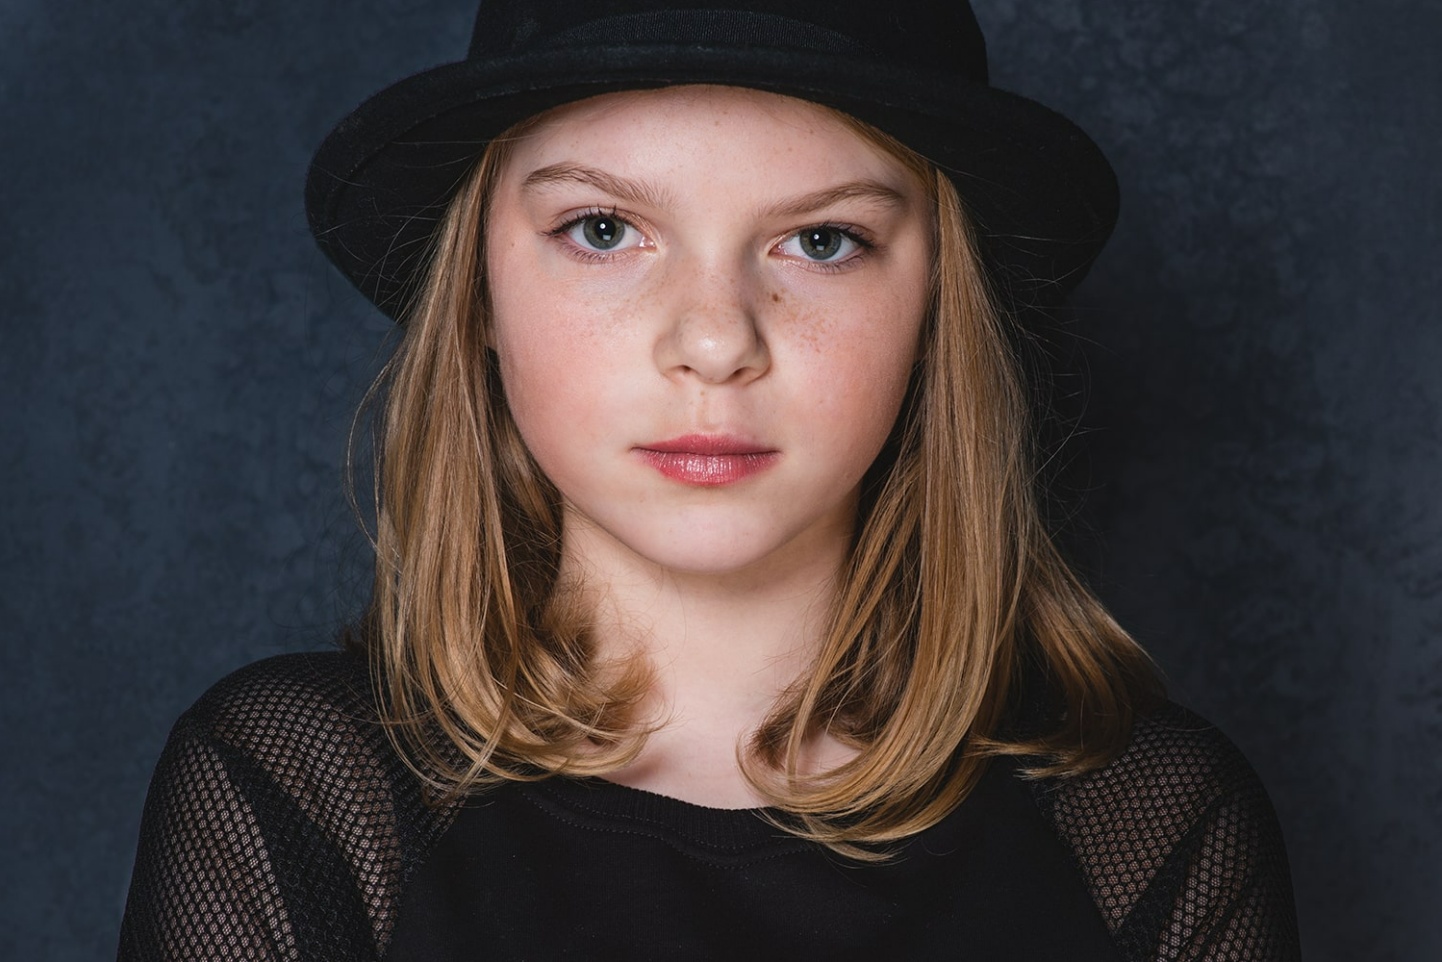 Betsy aged 11 from the series Being Inbetween (c) carolynmendelsohn